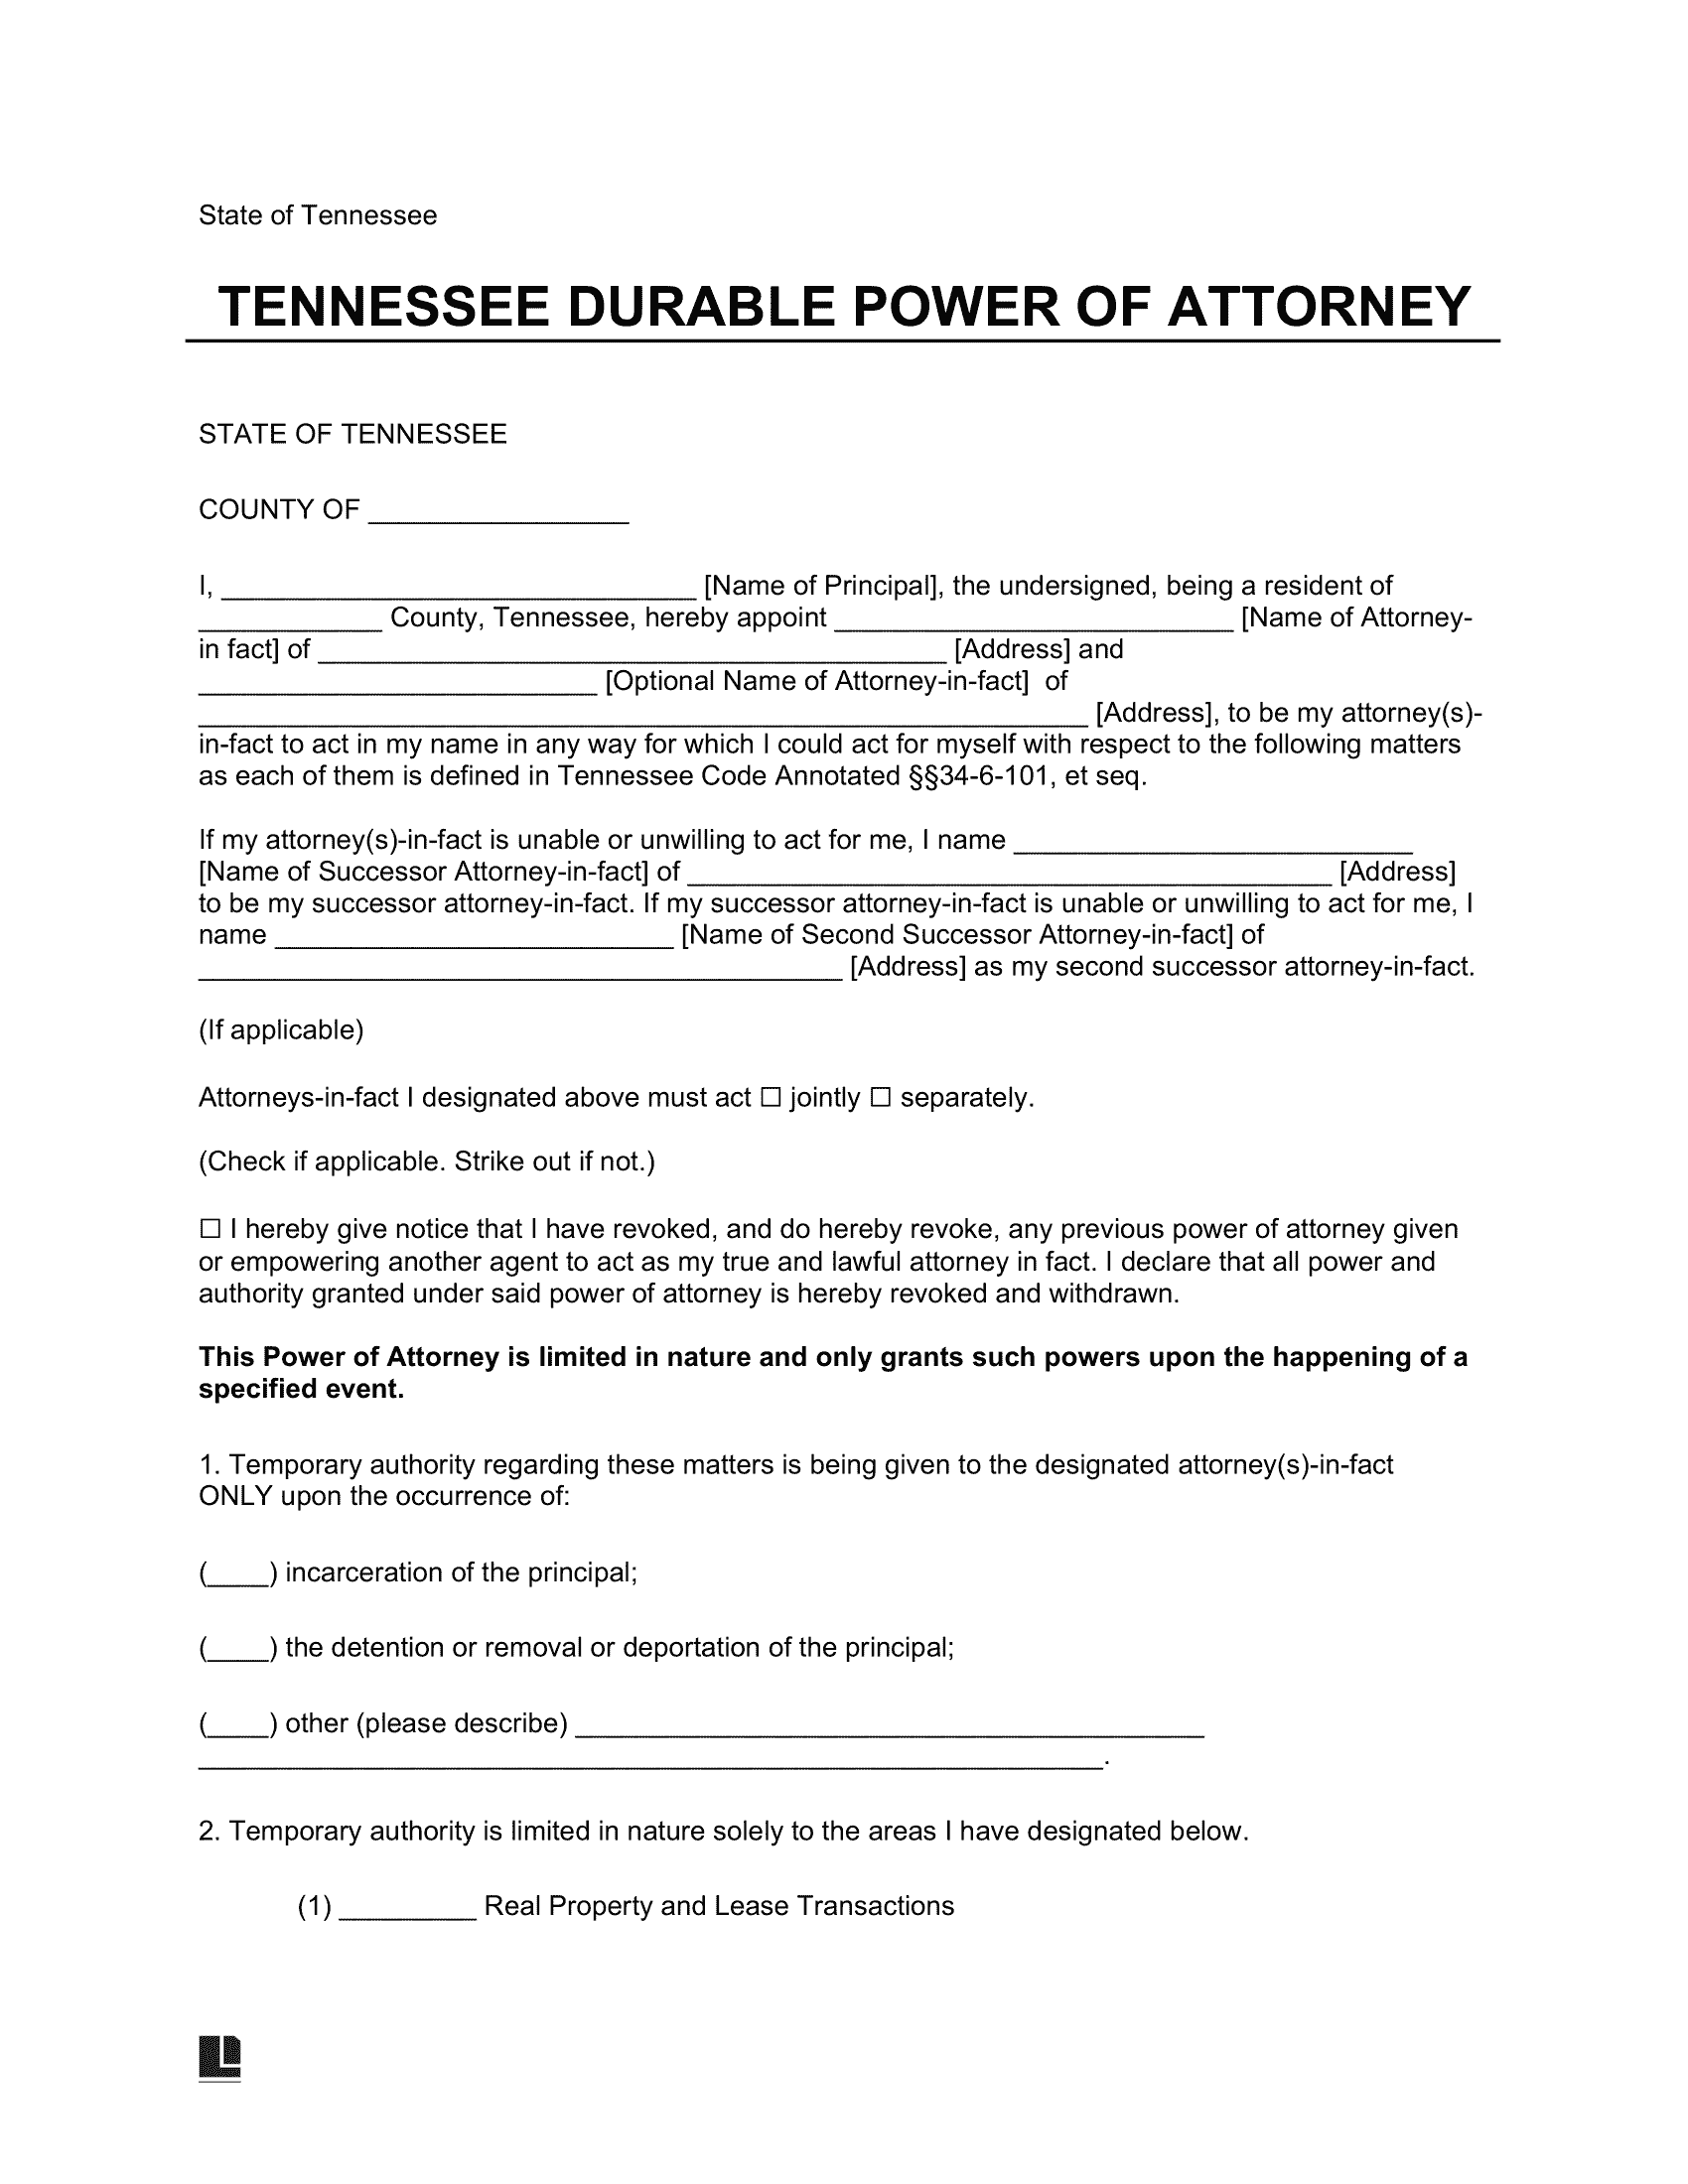 Tennessee Durable Power of Attorney Form